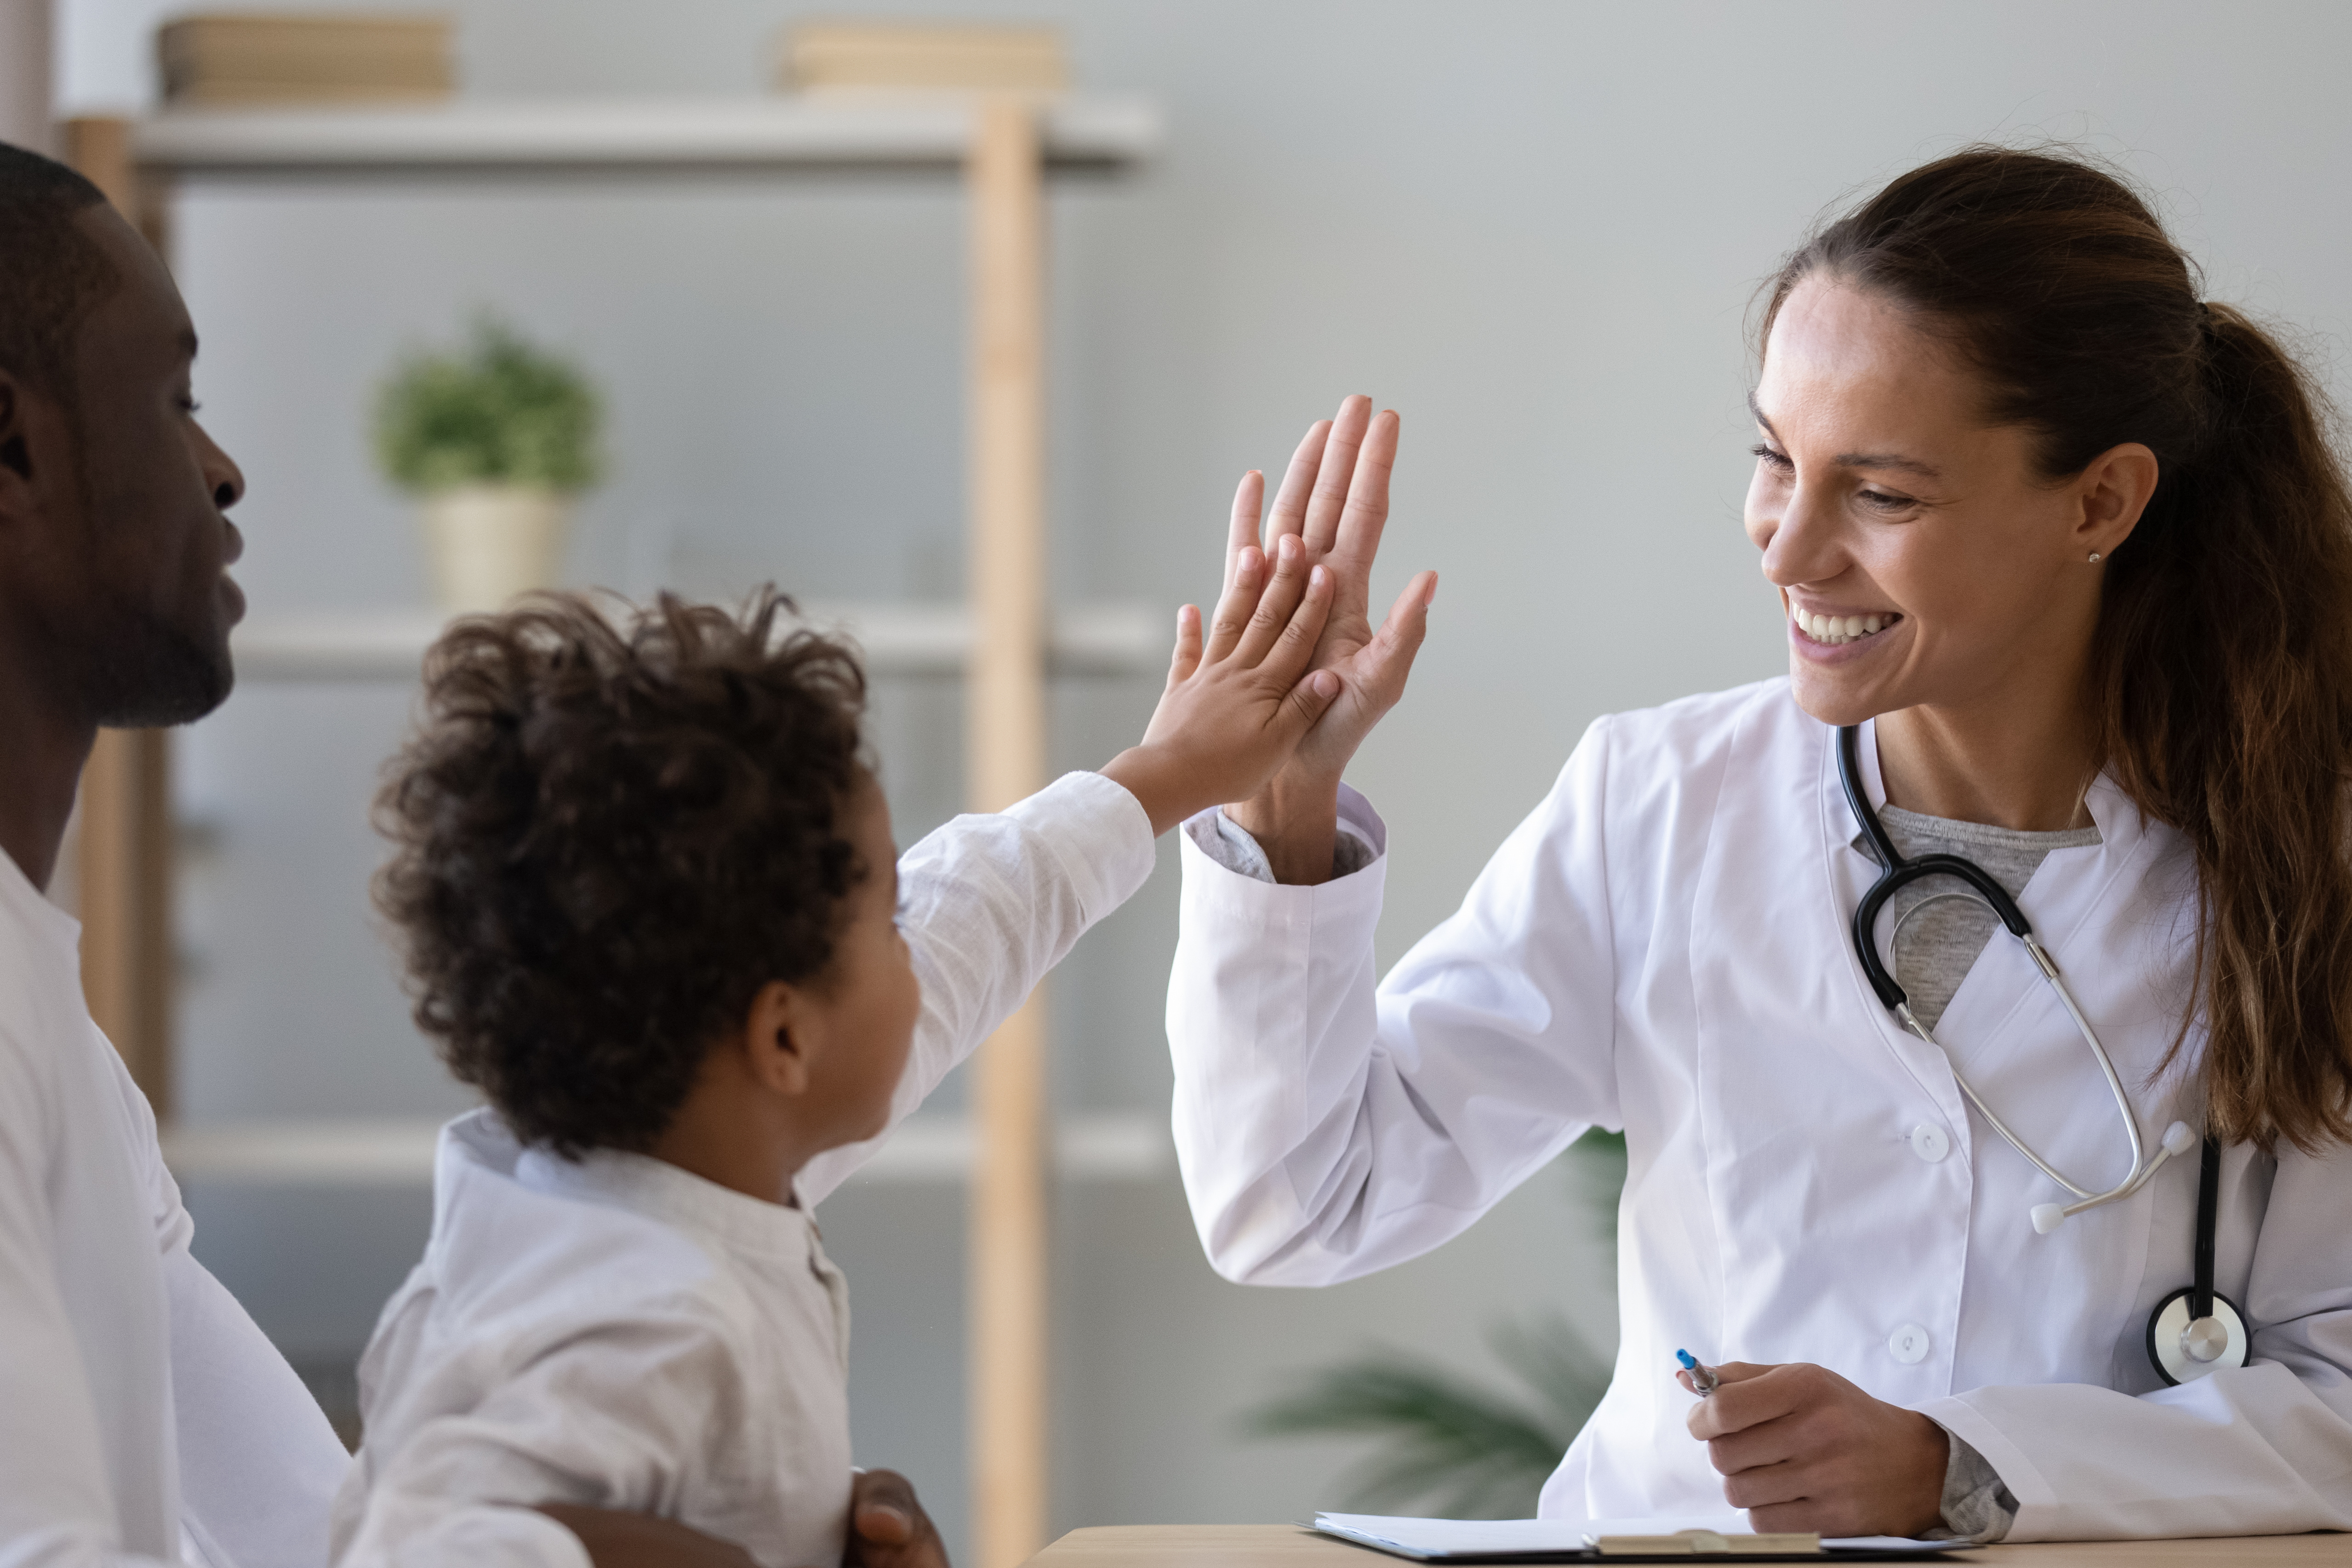 a little boy on his father's arm gives a smiling pediatrician a high five